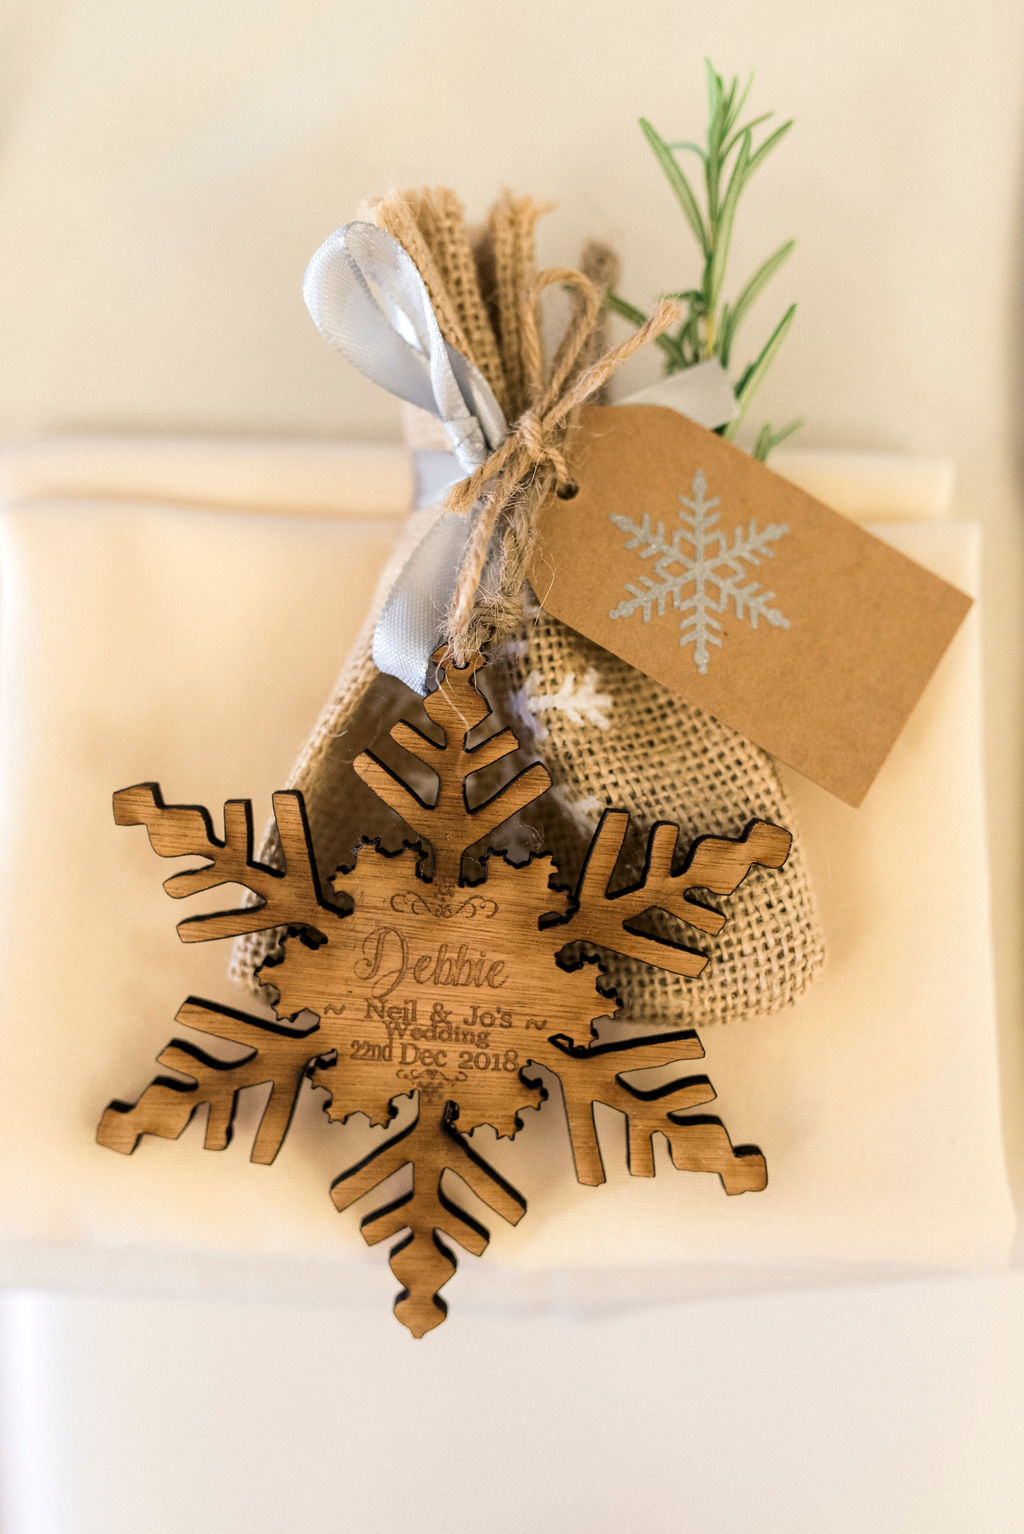 Festive wedding favour of wooden Christmas Tree decoration